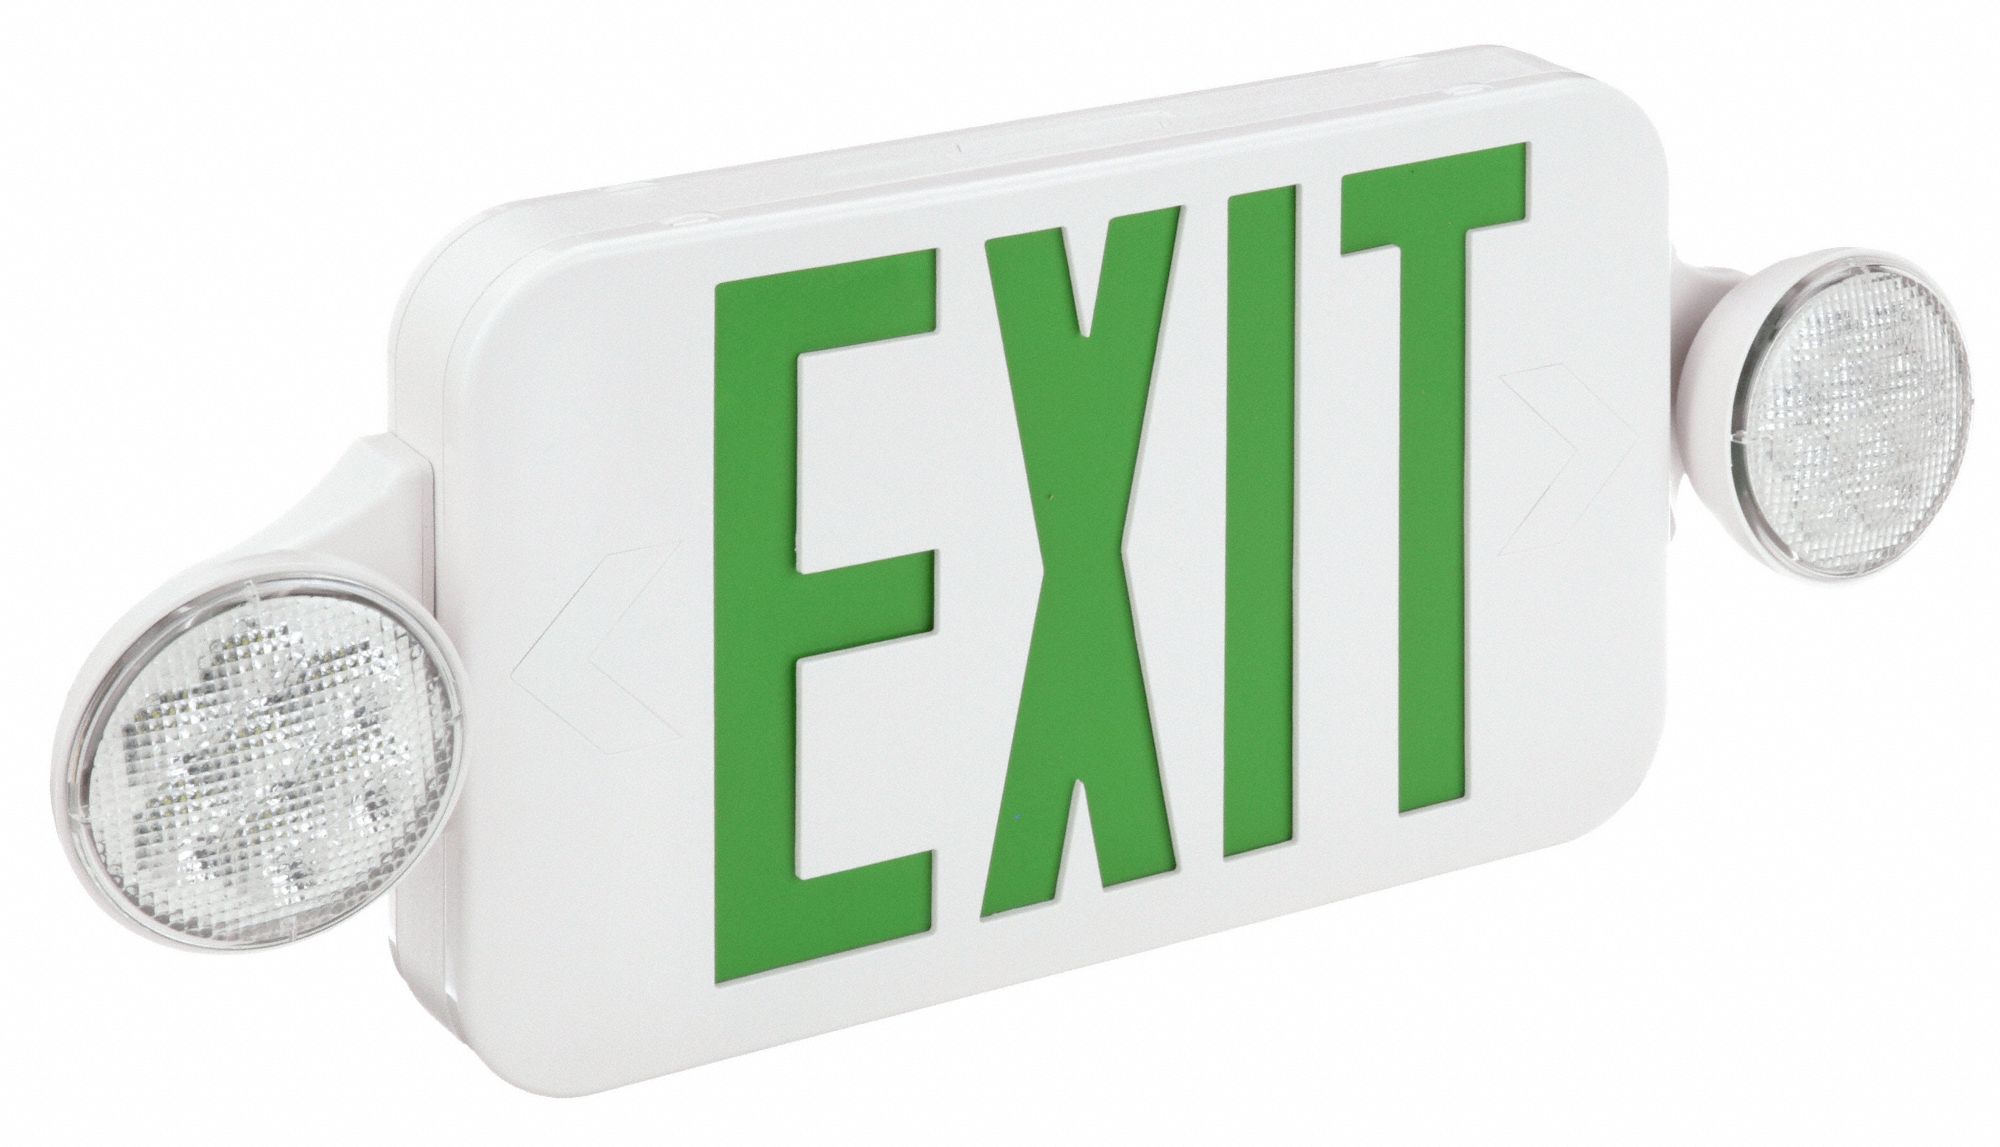 White, 1 or 2 Faces, Exit Sign with Emergency Lights - 32WU21|CCG ...